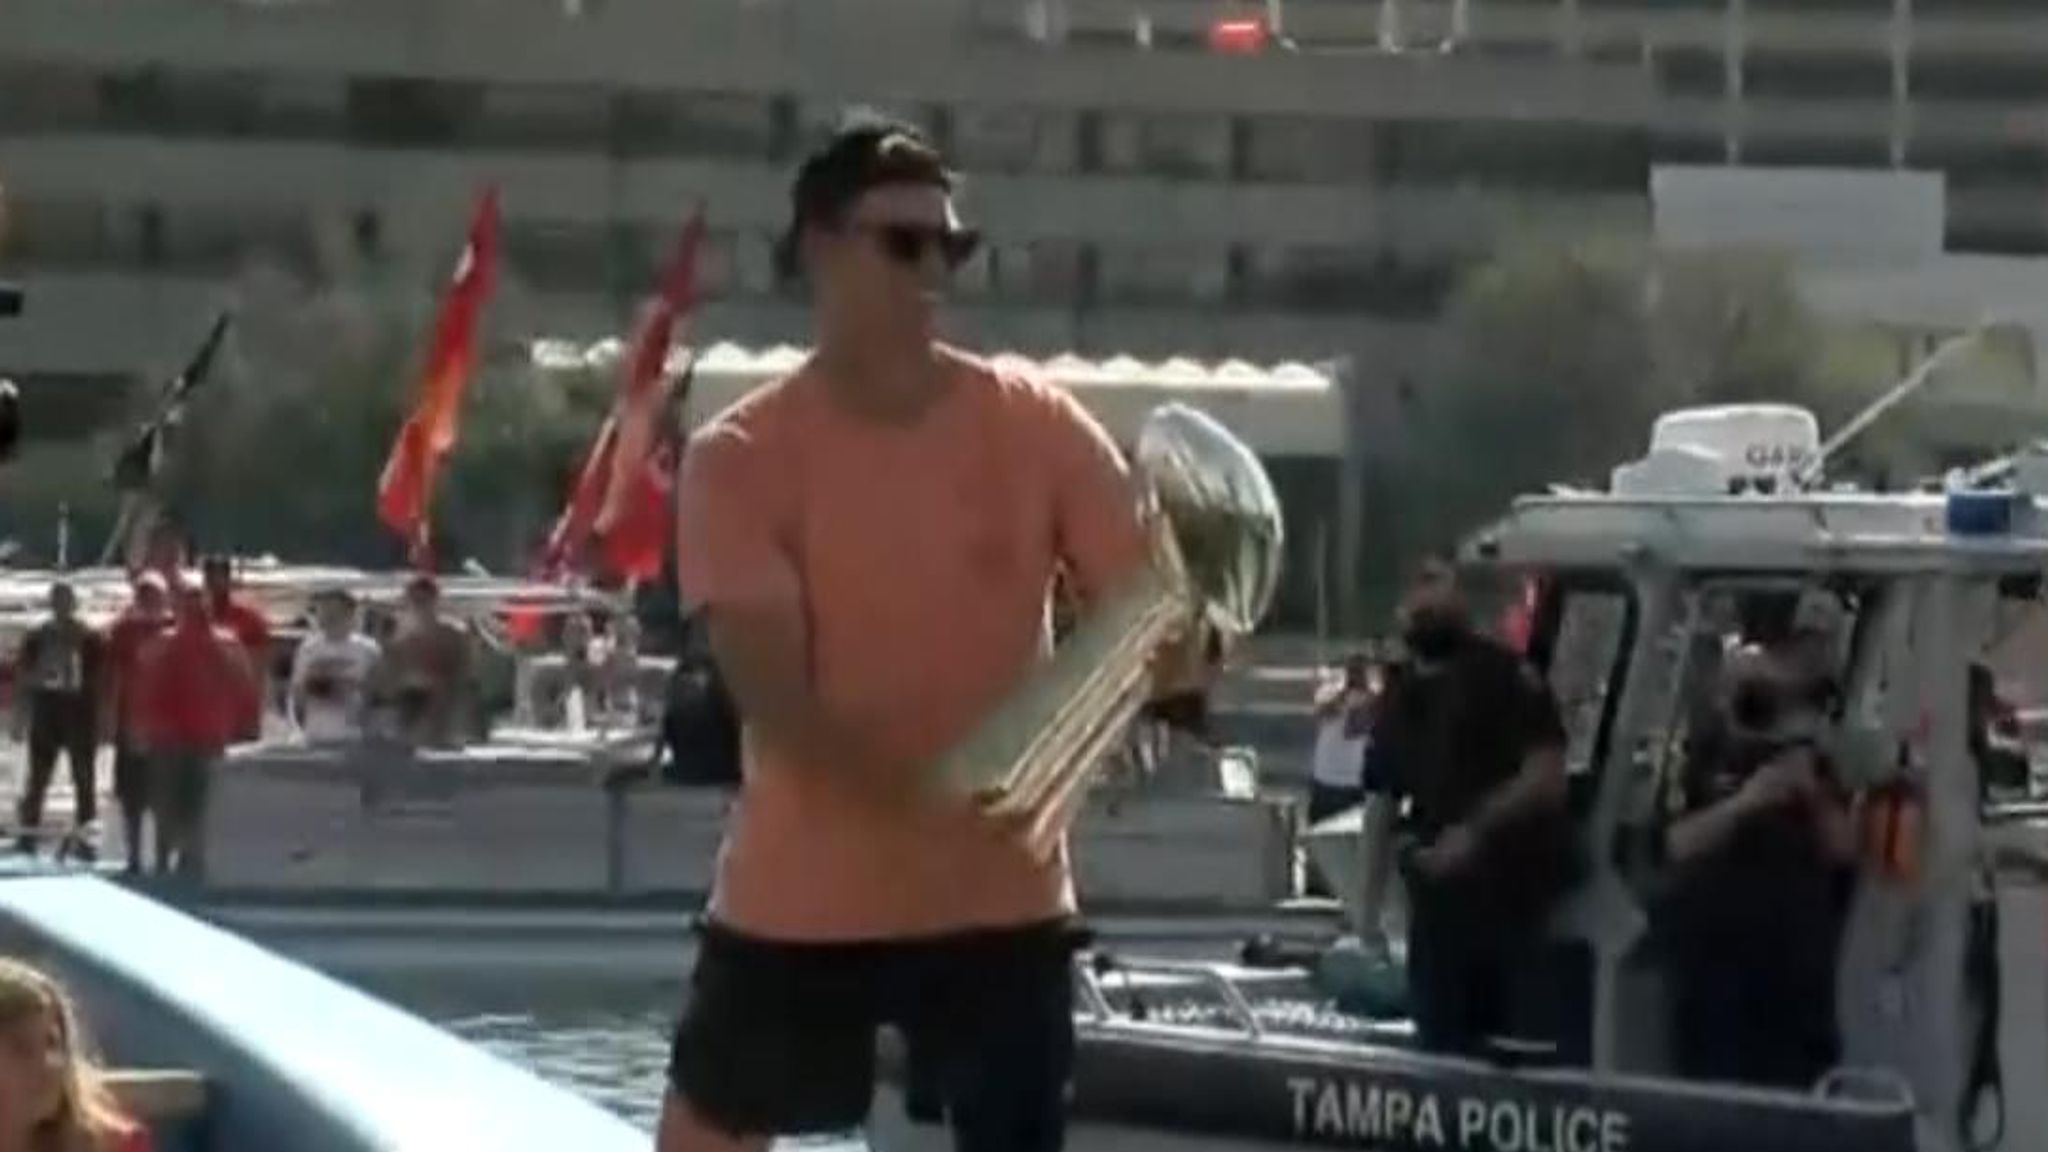 Tom Brady throws Super Bowl trophy to teammates on another boat during  parade, US News